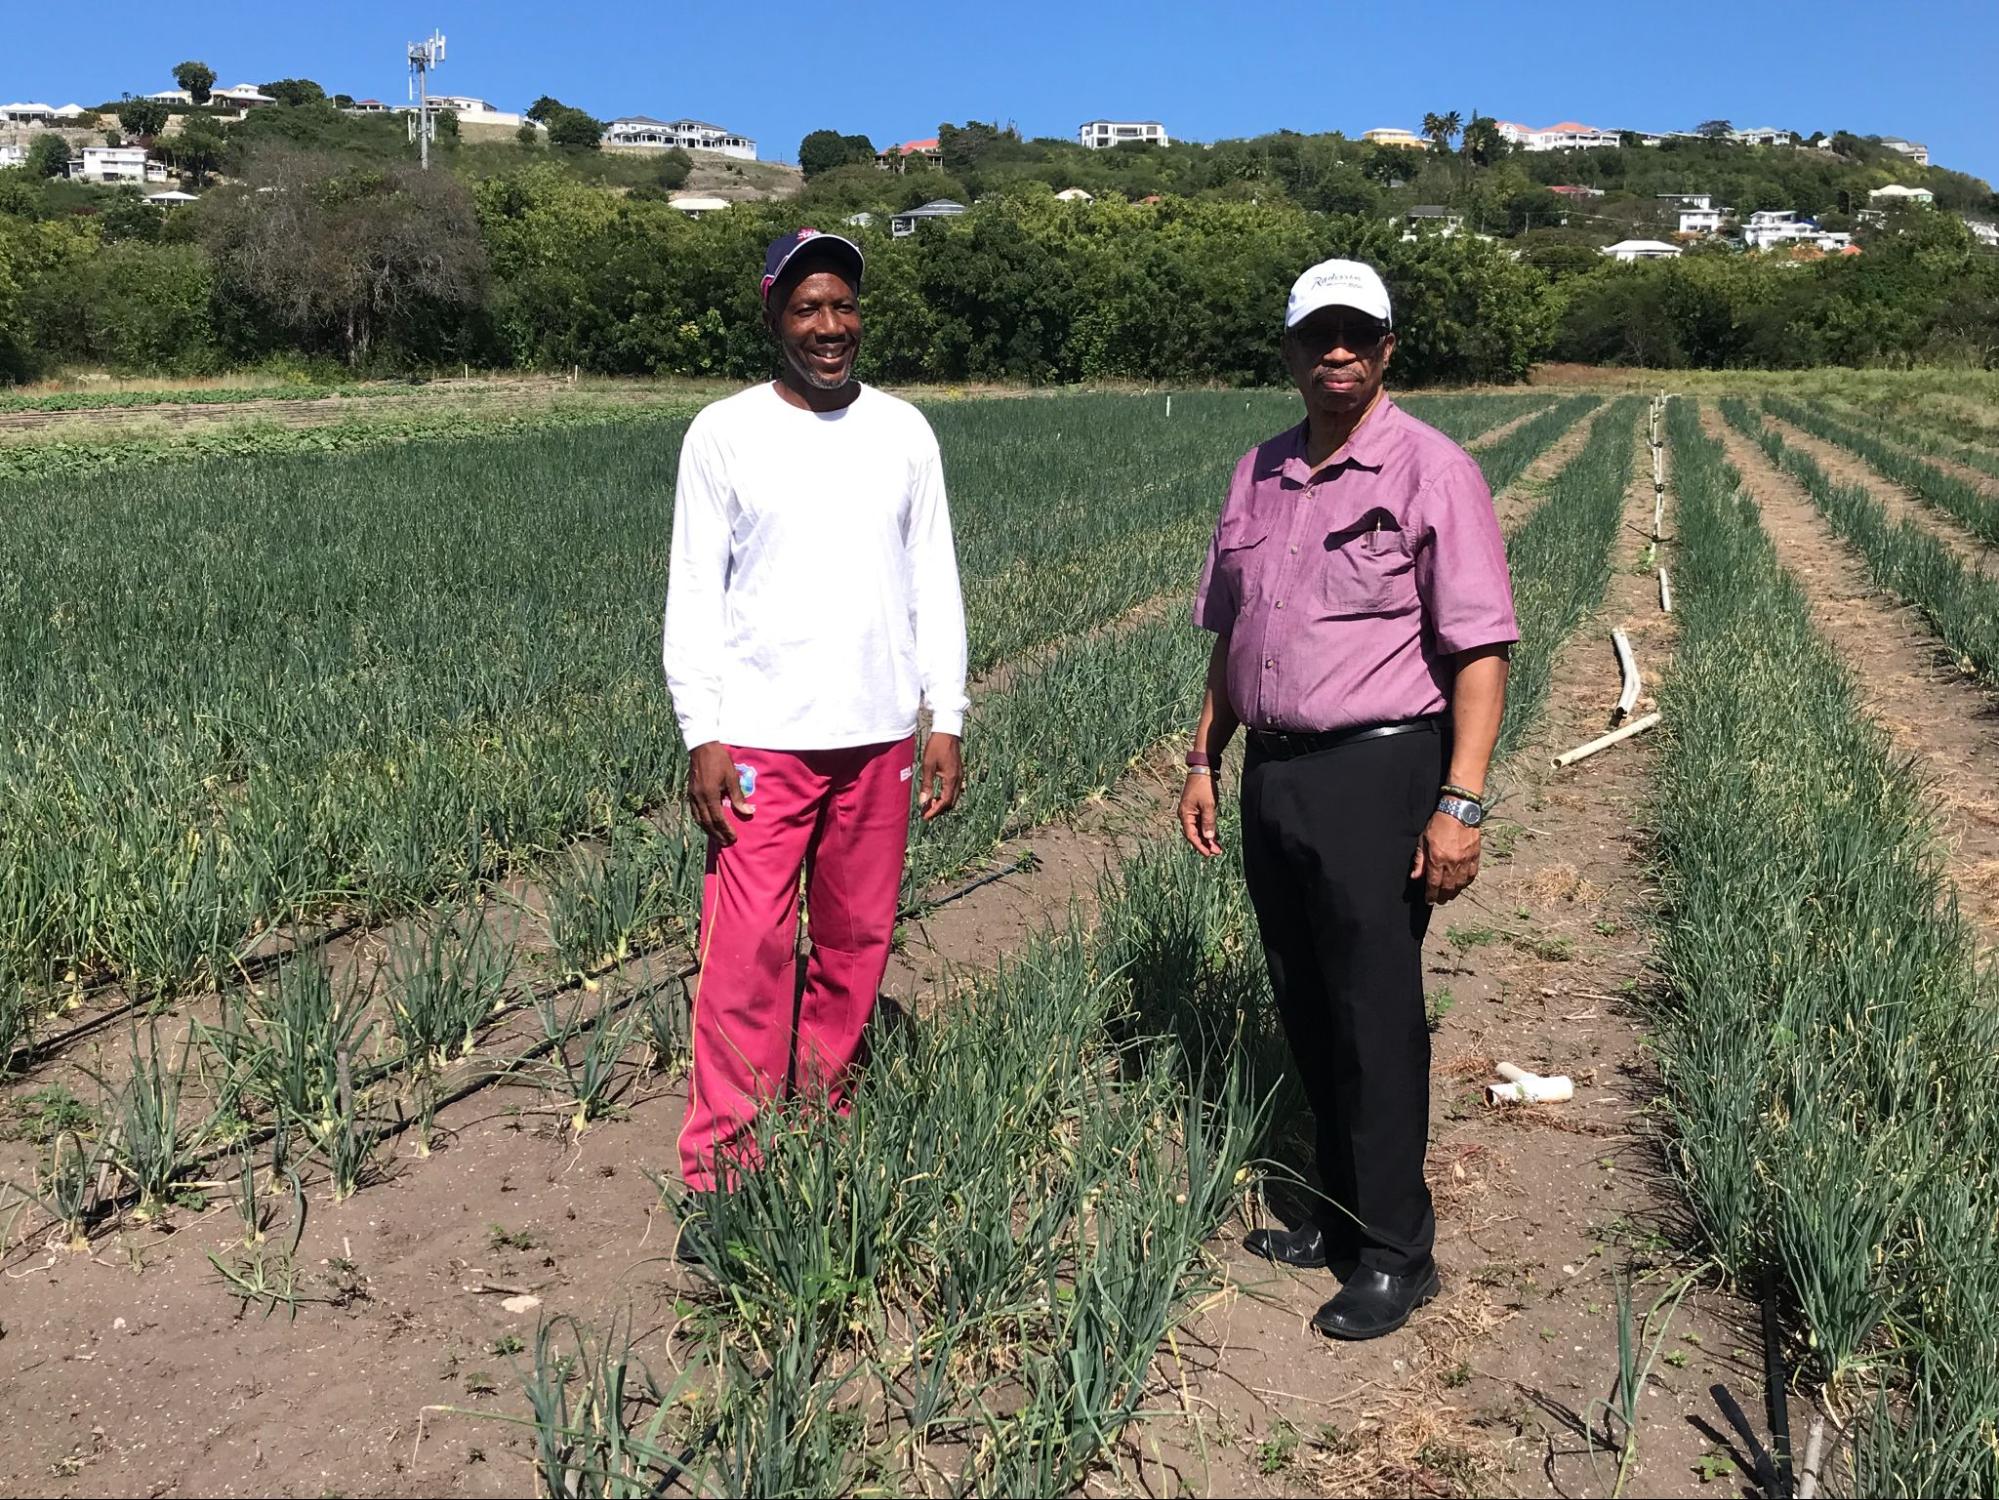 Neil Gomes (left) at his farm in McKinnons in March 2022, with IICA Representative in the Eastern Caribbean States, Mr. Gregg Rawlins, who visited the farm to view the results of drip lines, which Mr. Gomes received to boost his onion production under a Crowdfunding campaign (Photo: IICA Antigua)